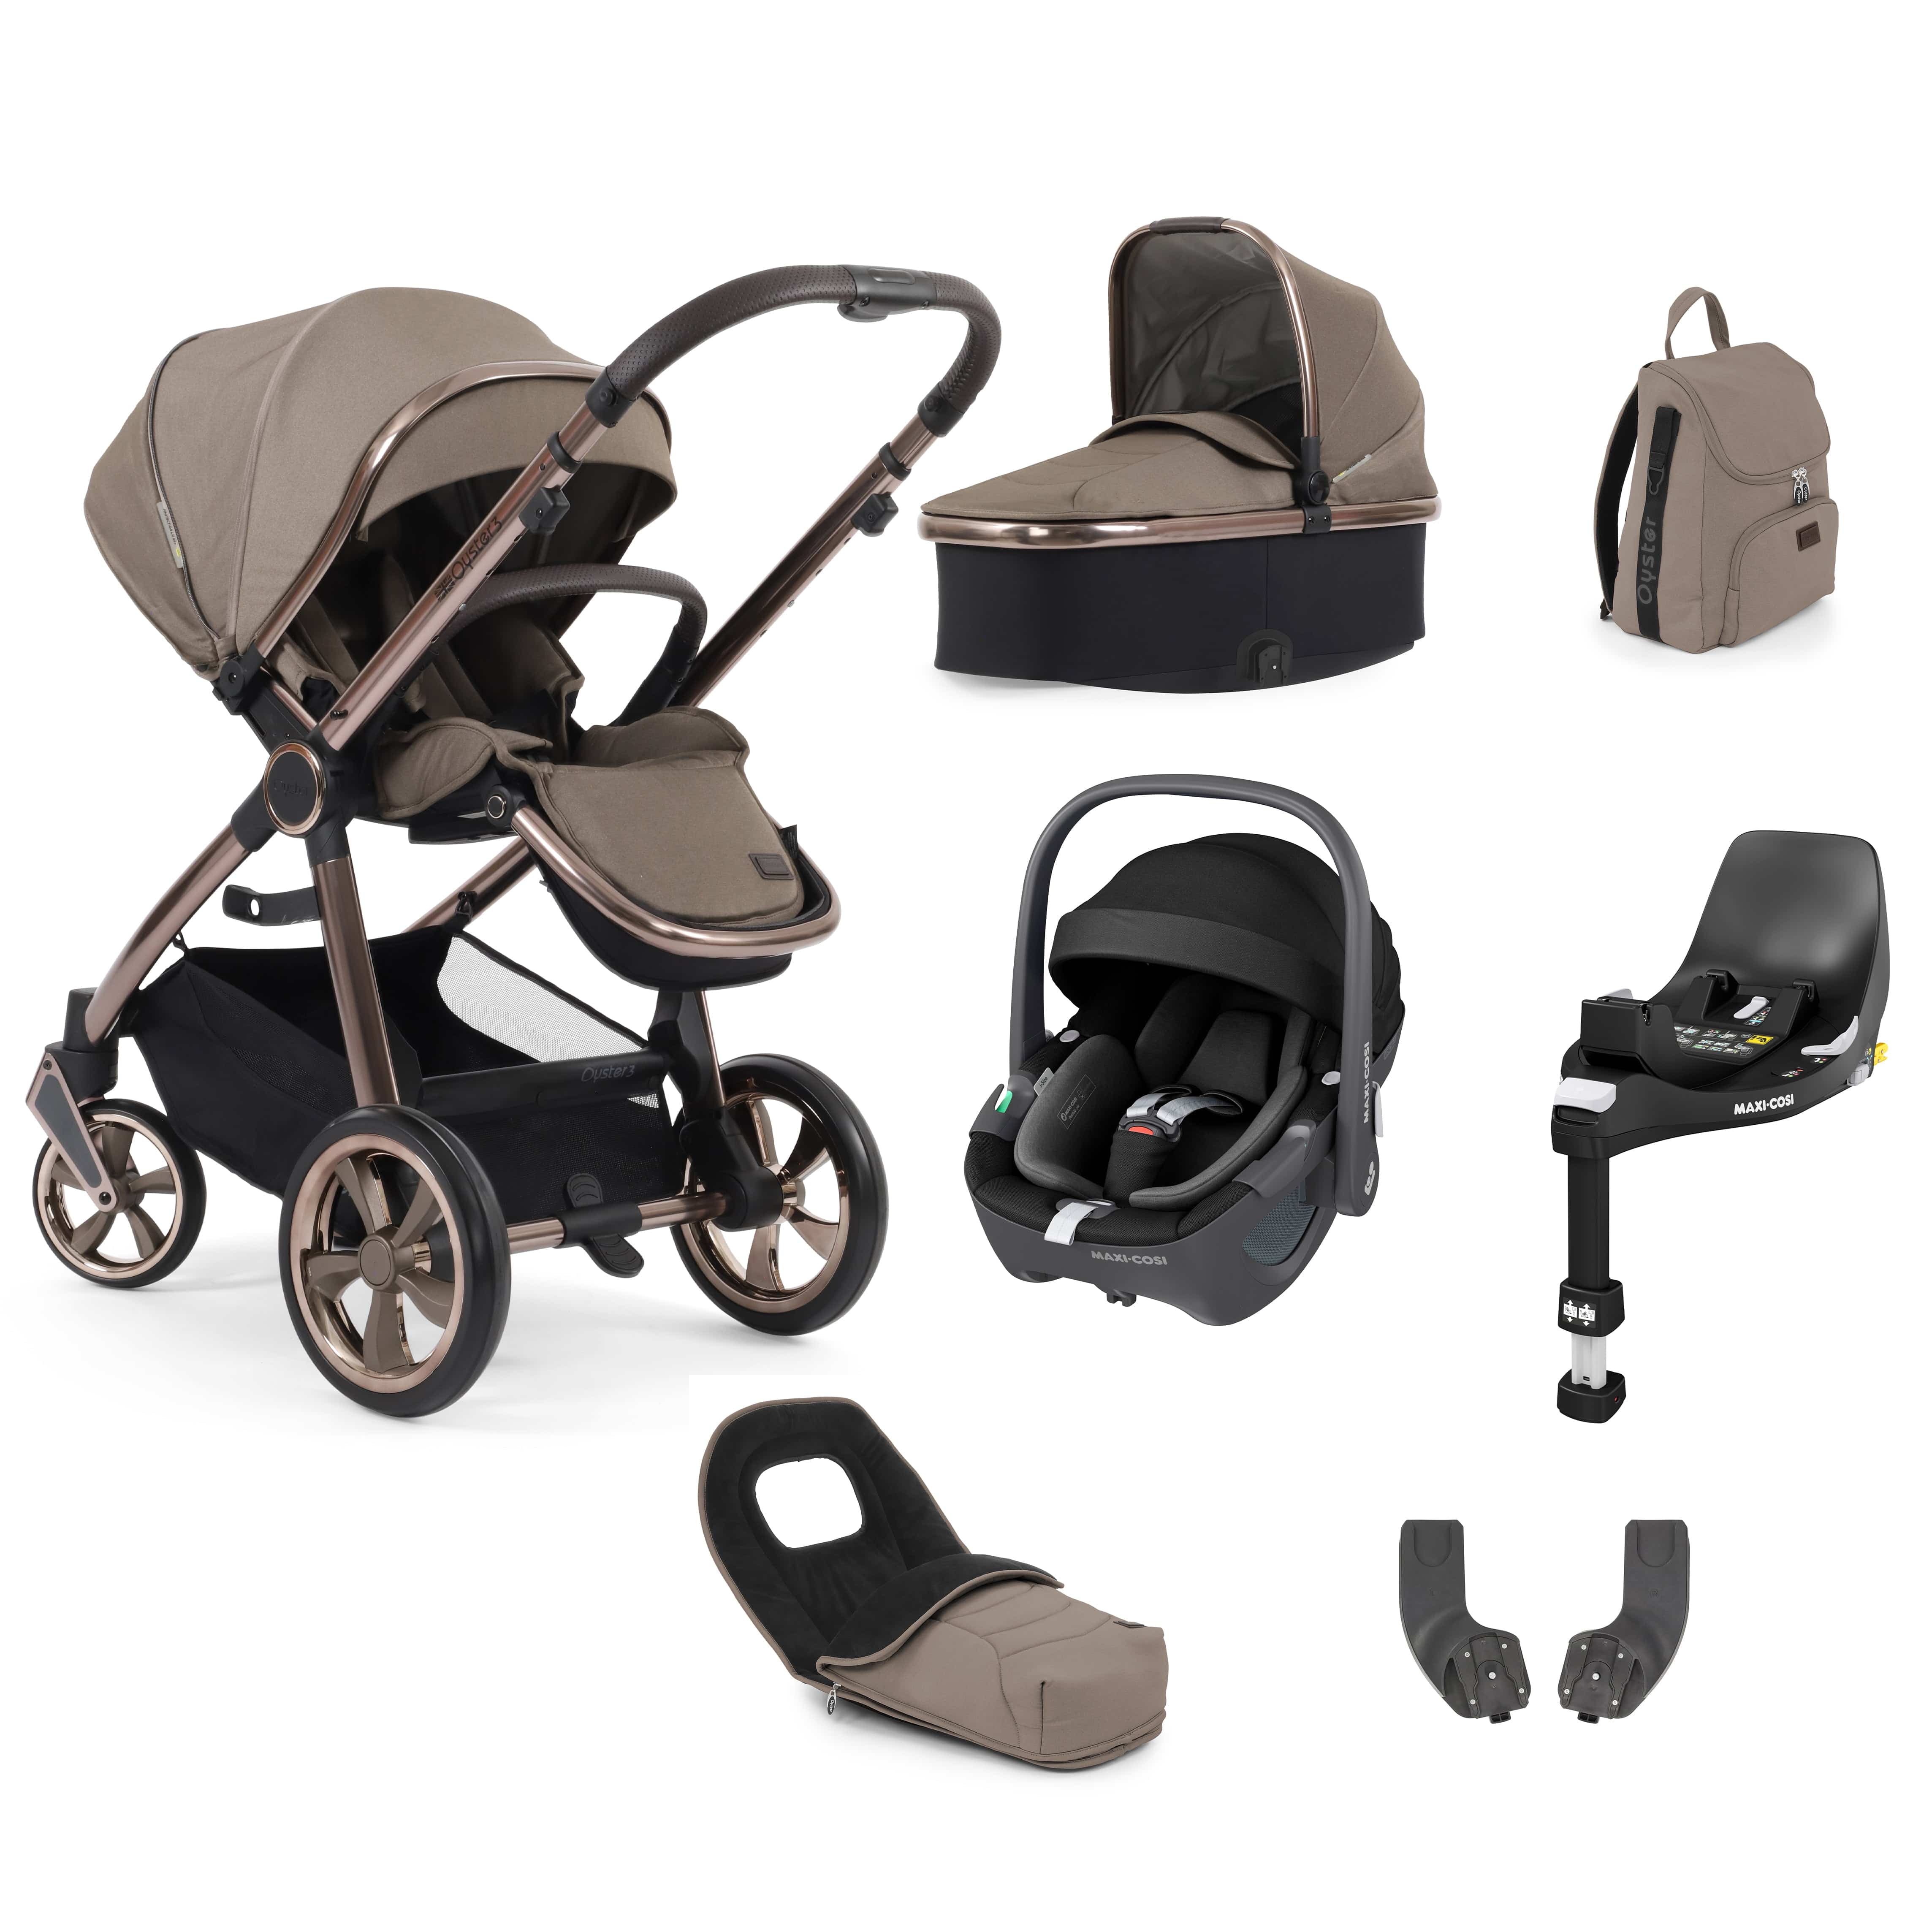 BabyStyle travel systems Babystyle Oyster 3 Luxury 7 Piece with Car Seat Bundle in Mink 14807-MNK